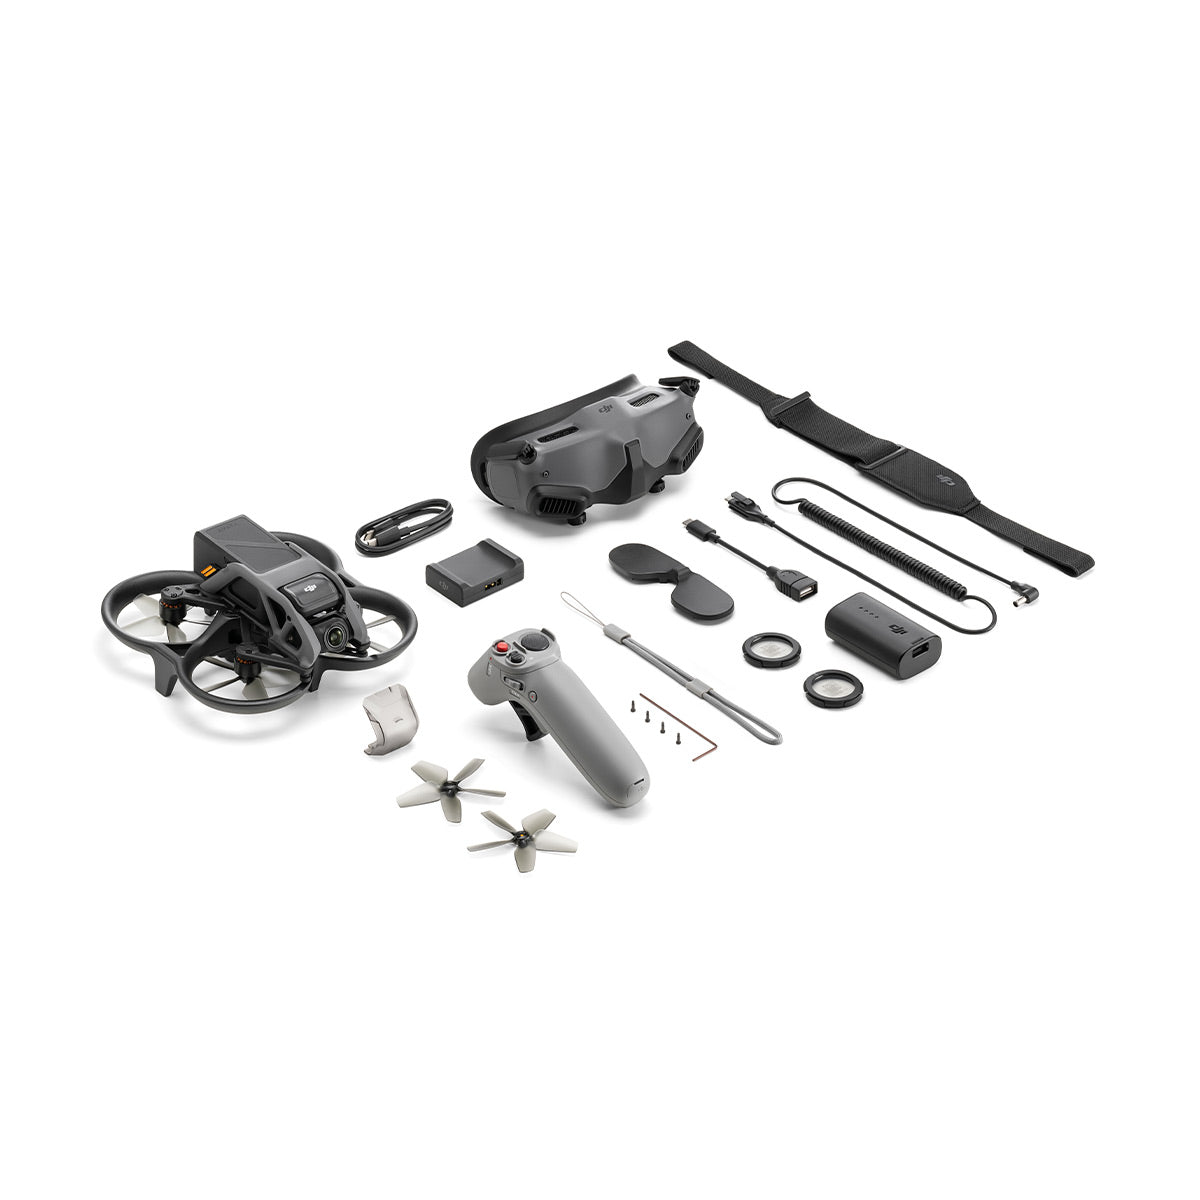 DJI Avata Pro View Combo with Motion Controller